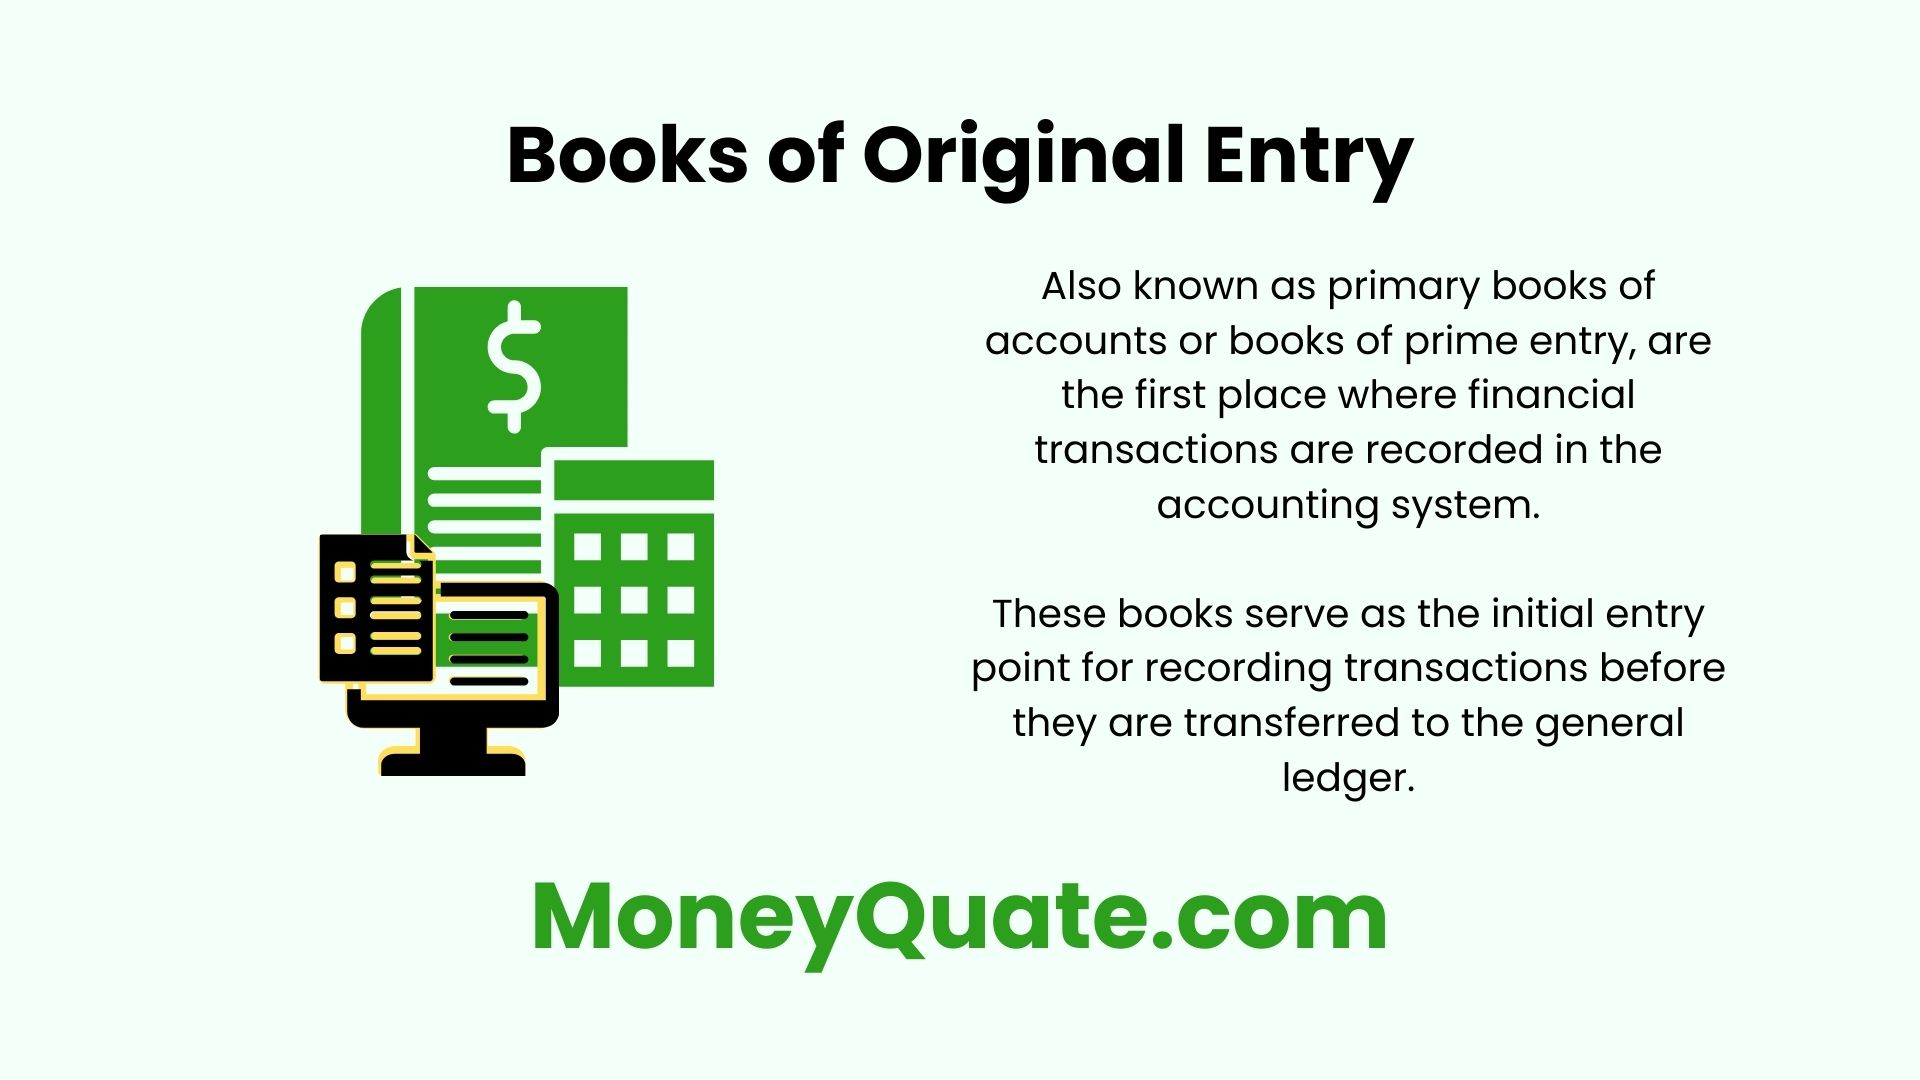 What are Books of Original Entry?